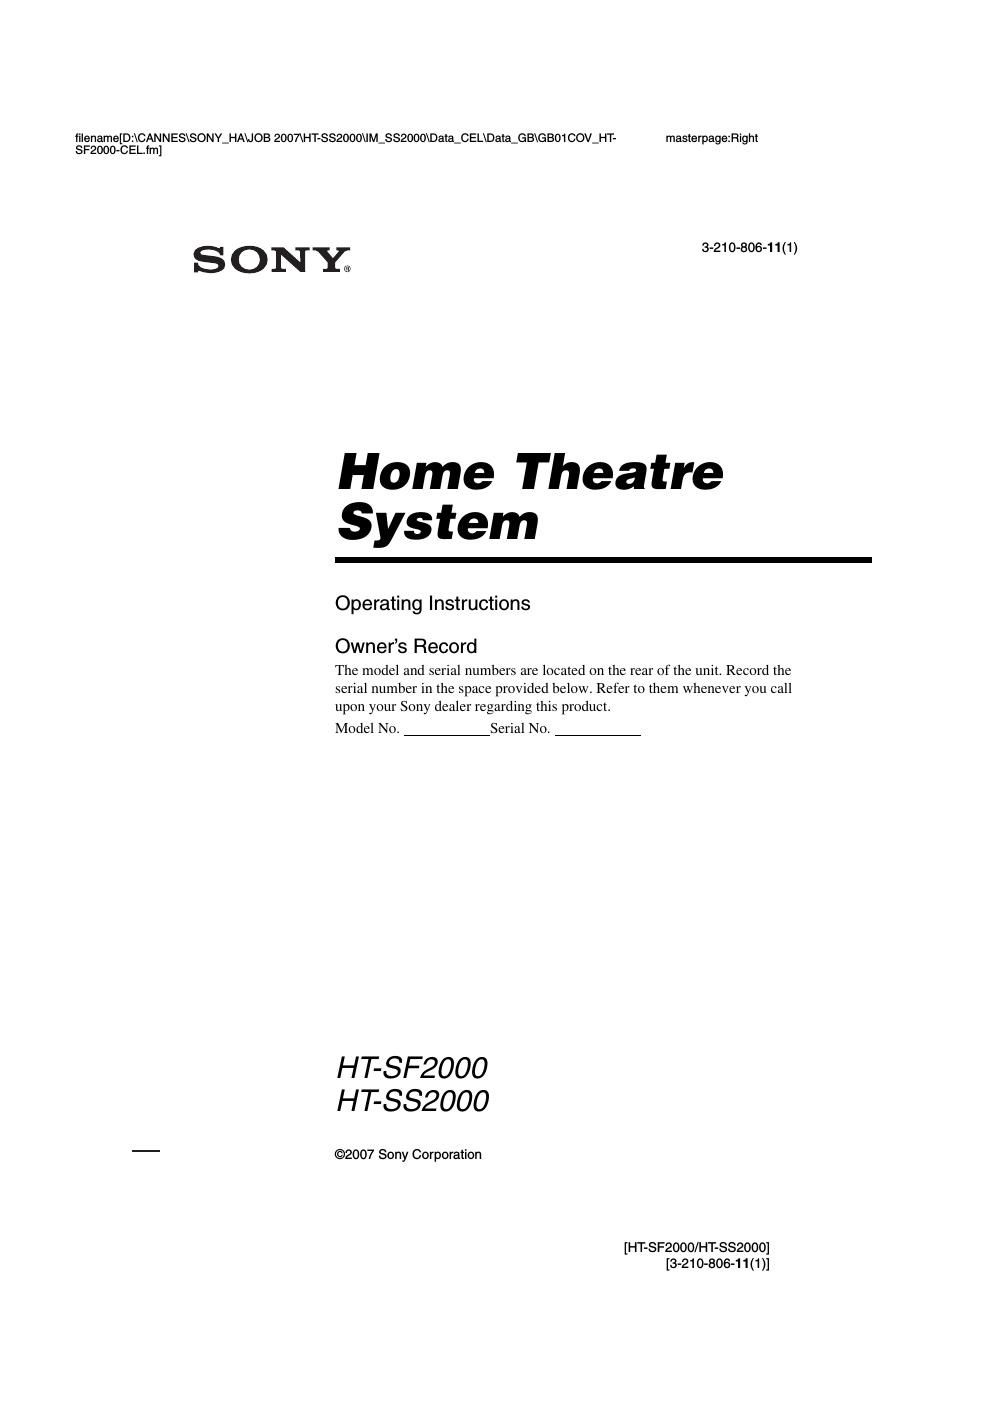 sony htss 2000 owners manual